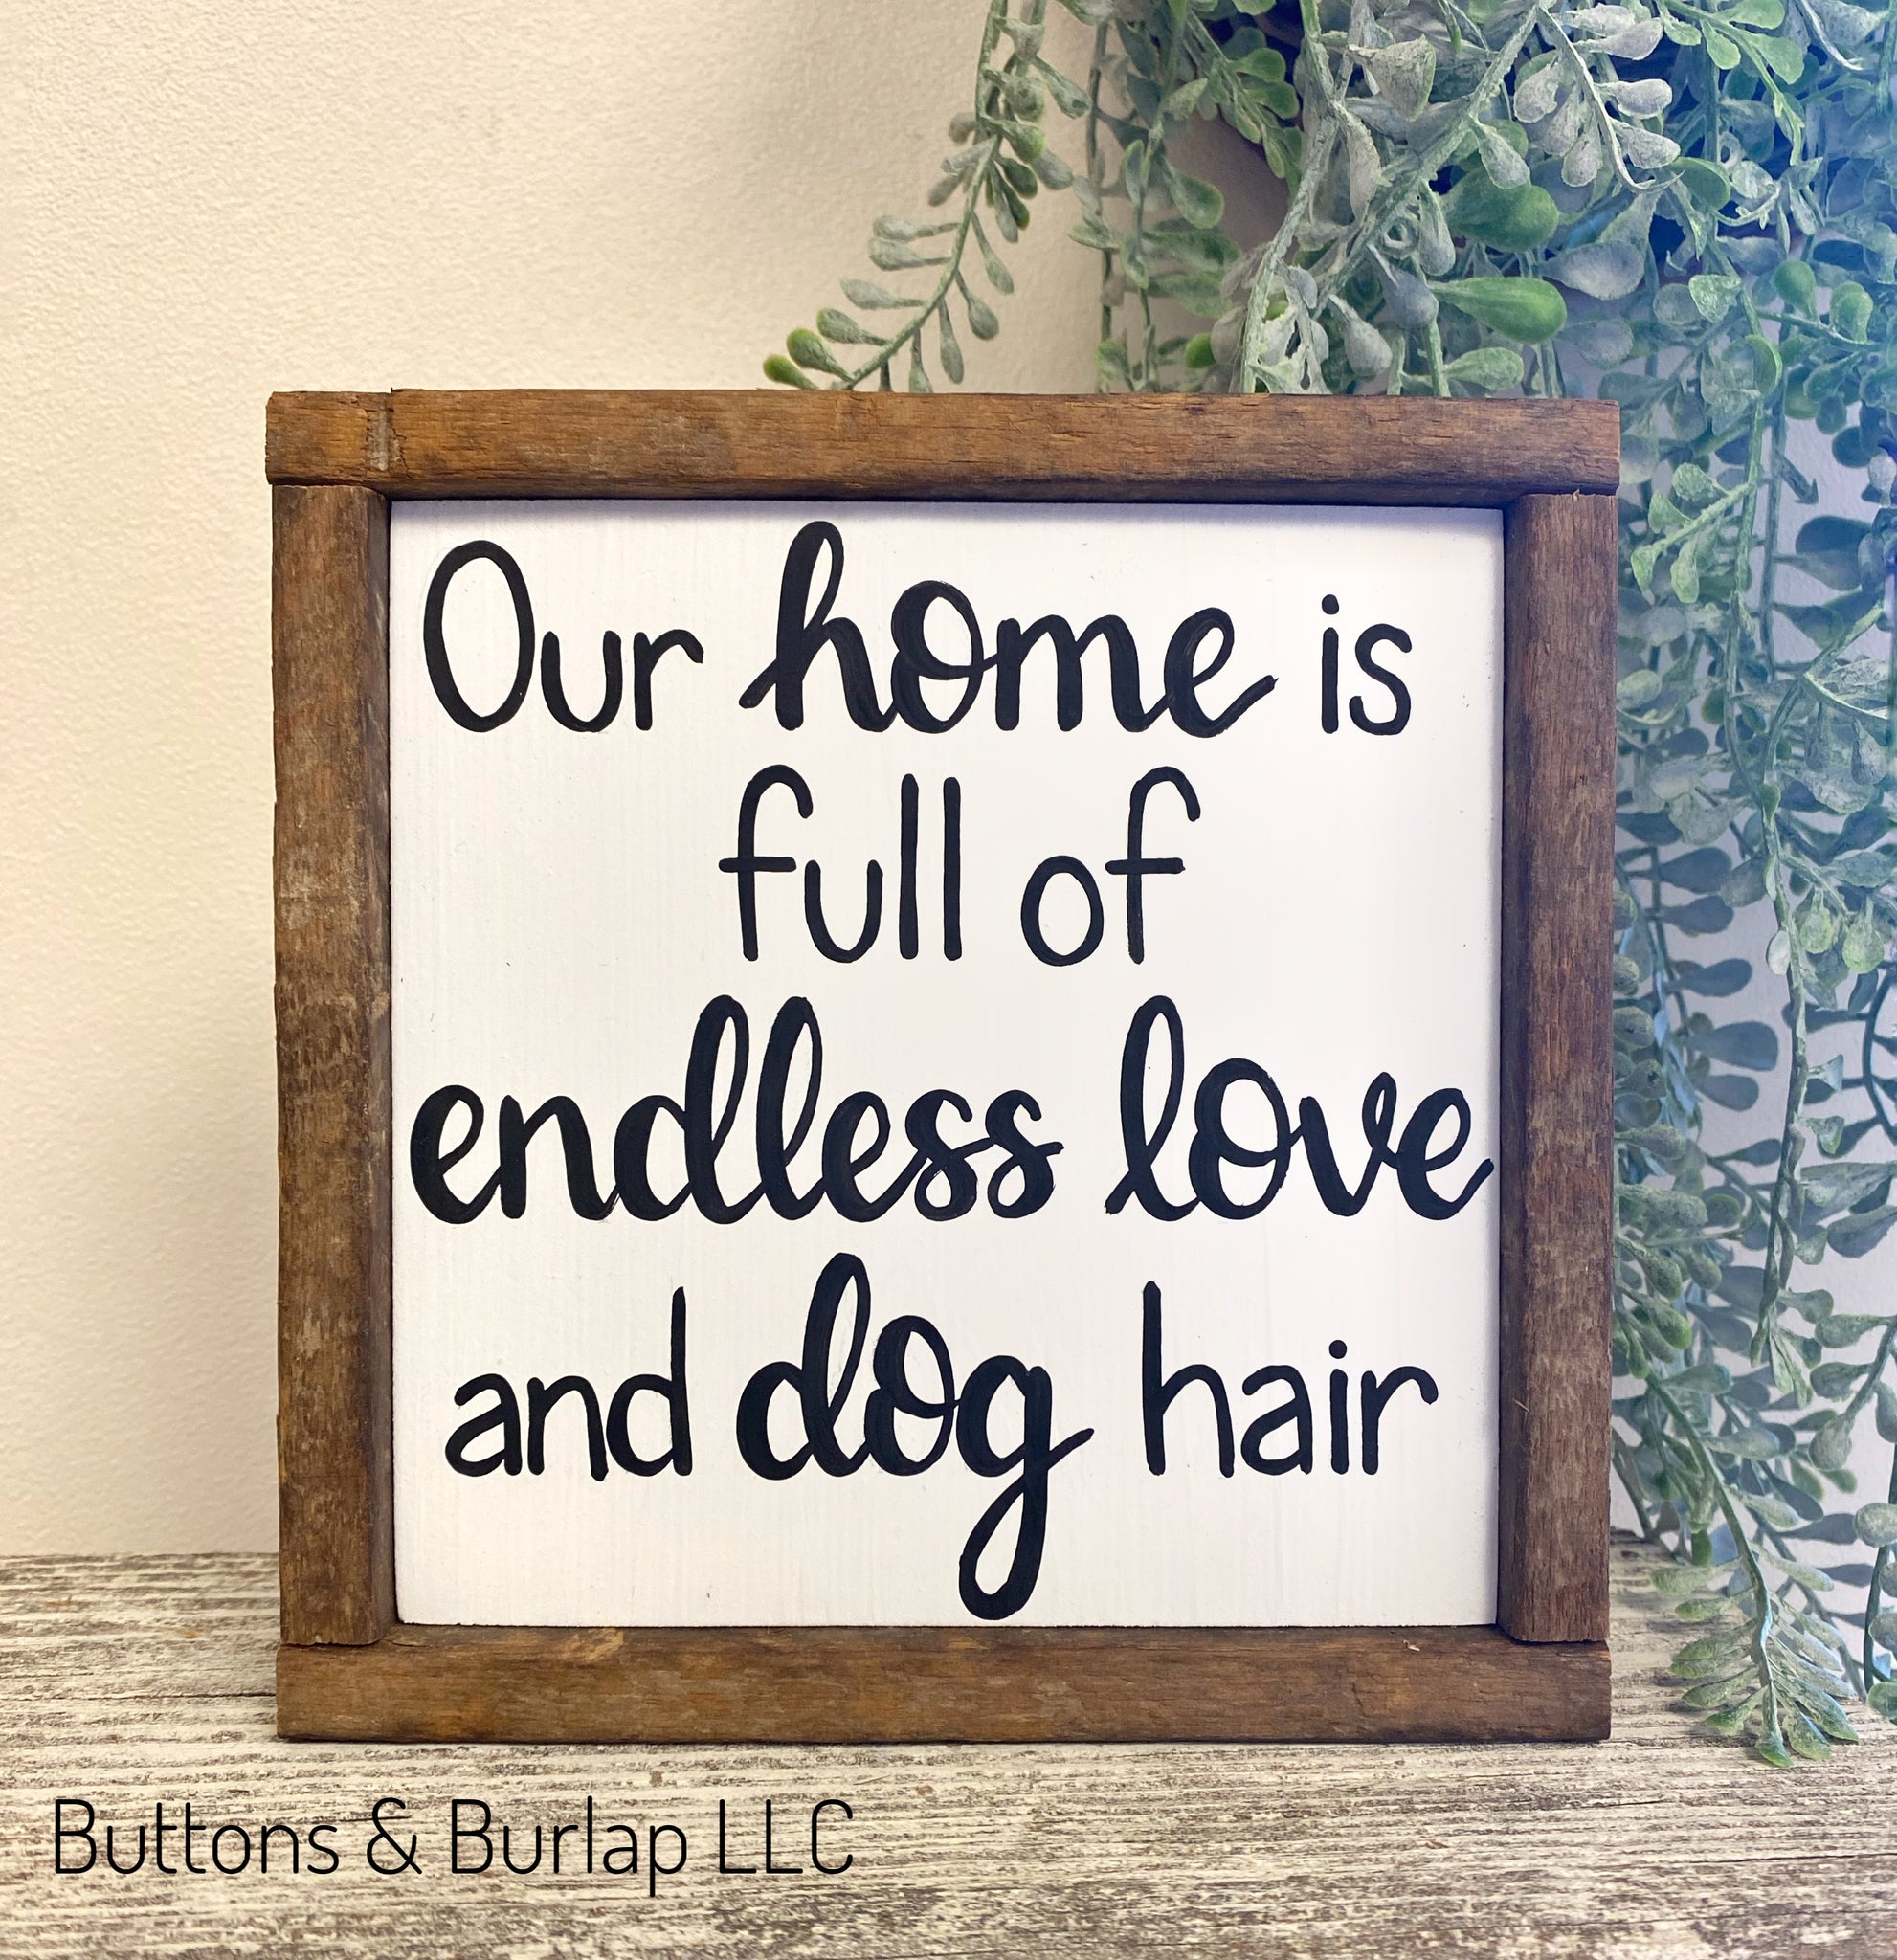 Endless love and dog/cat hair